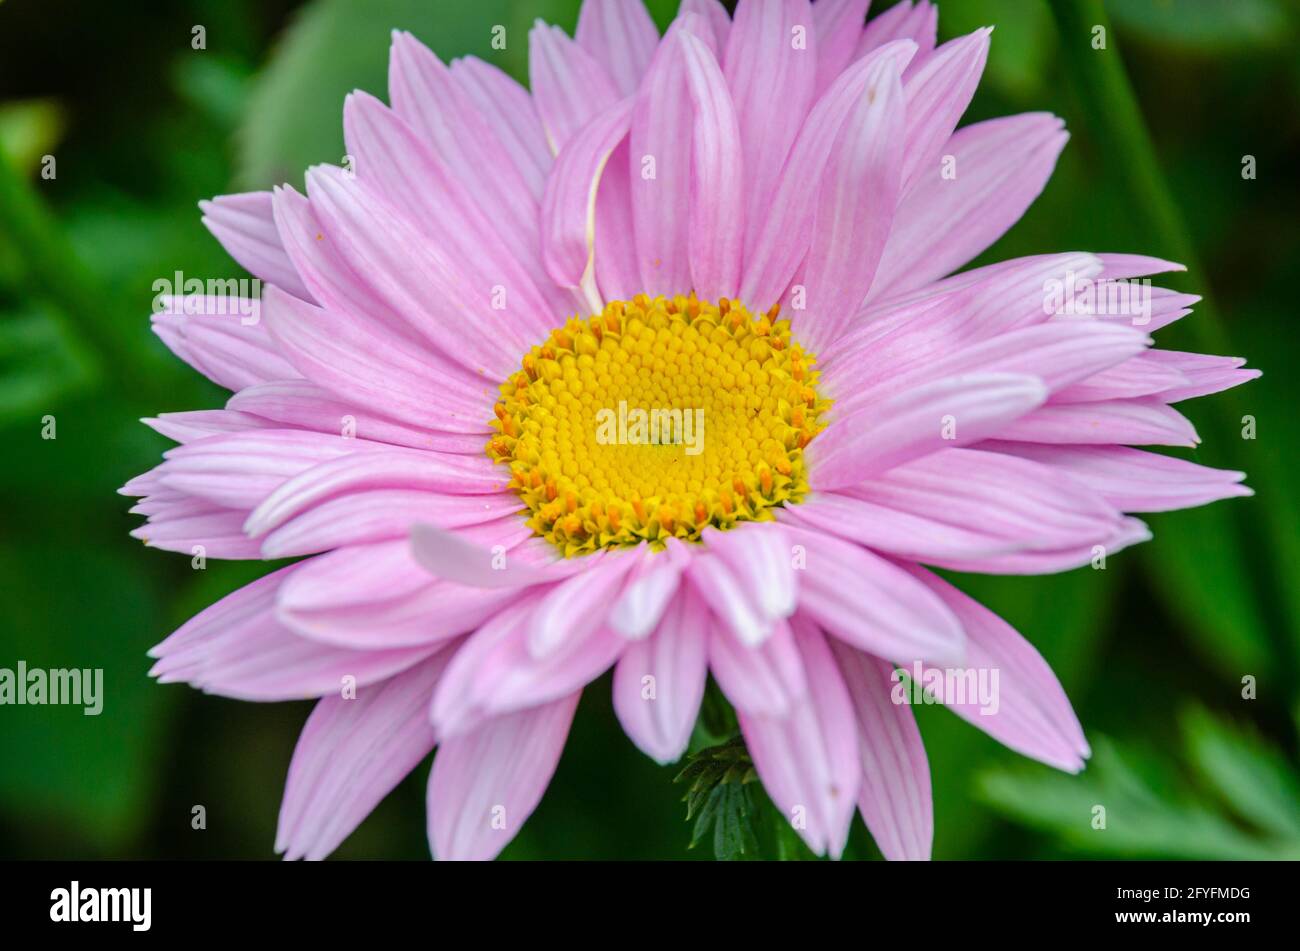 Close up view of a pink pyrethum flower in a garden. Stock Photo